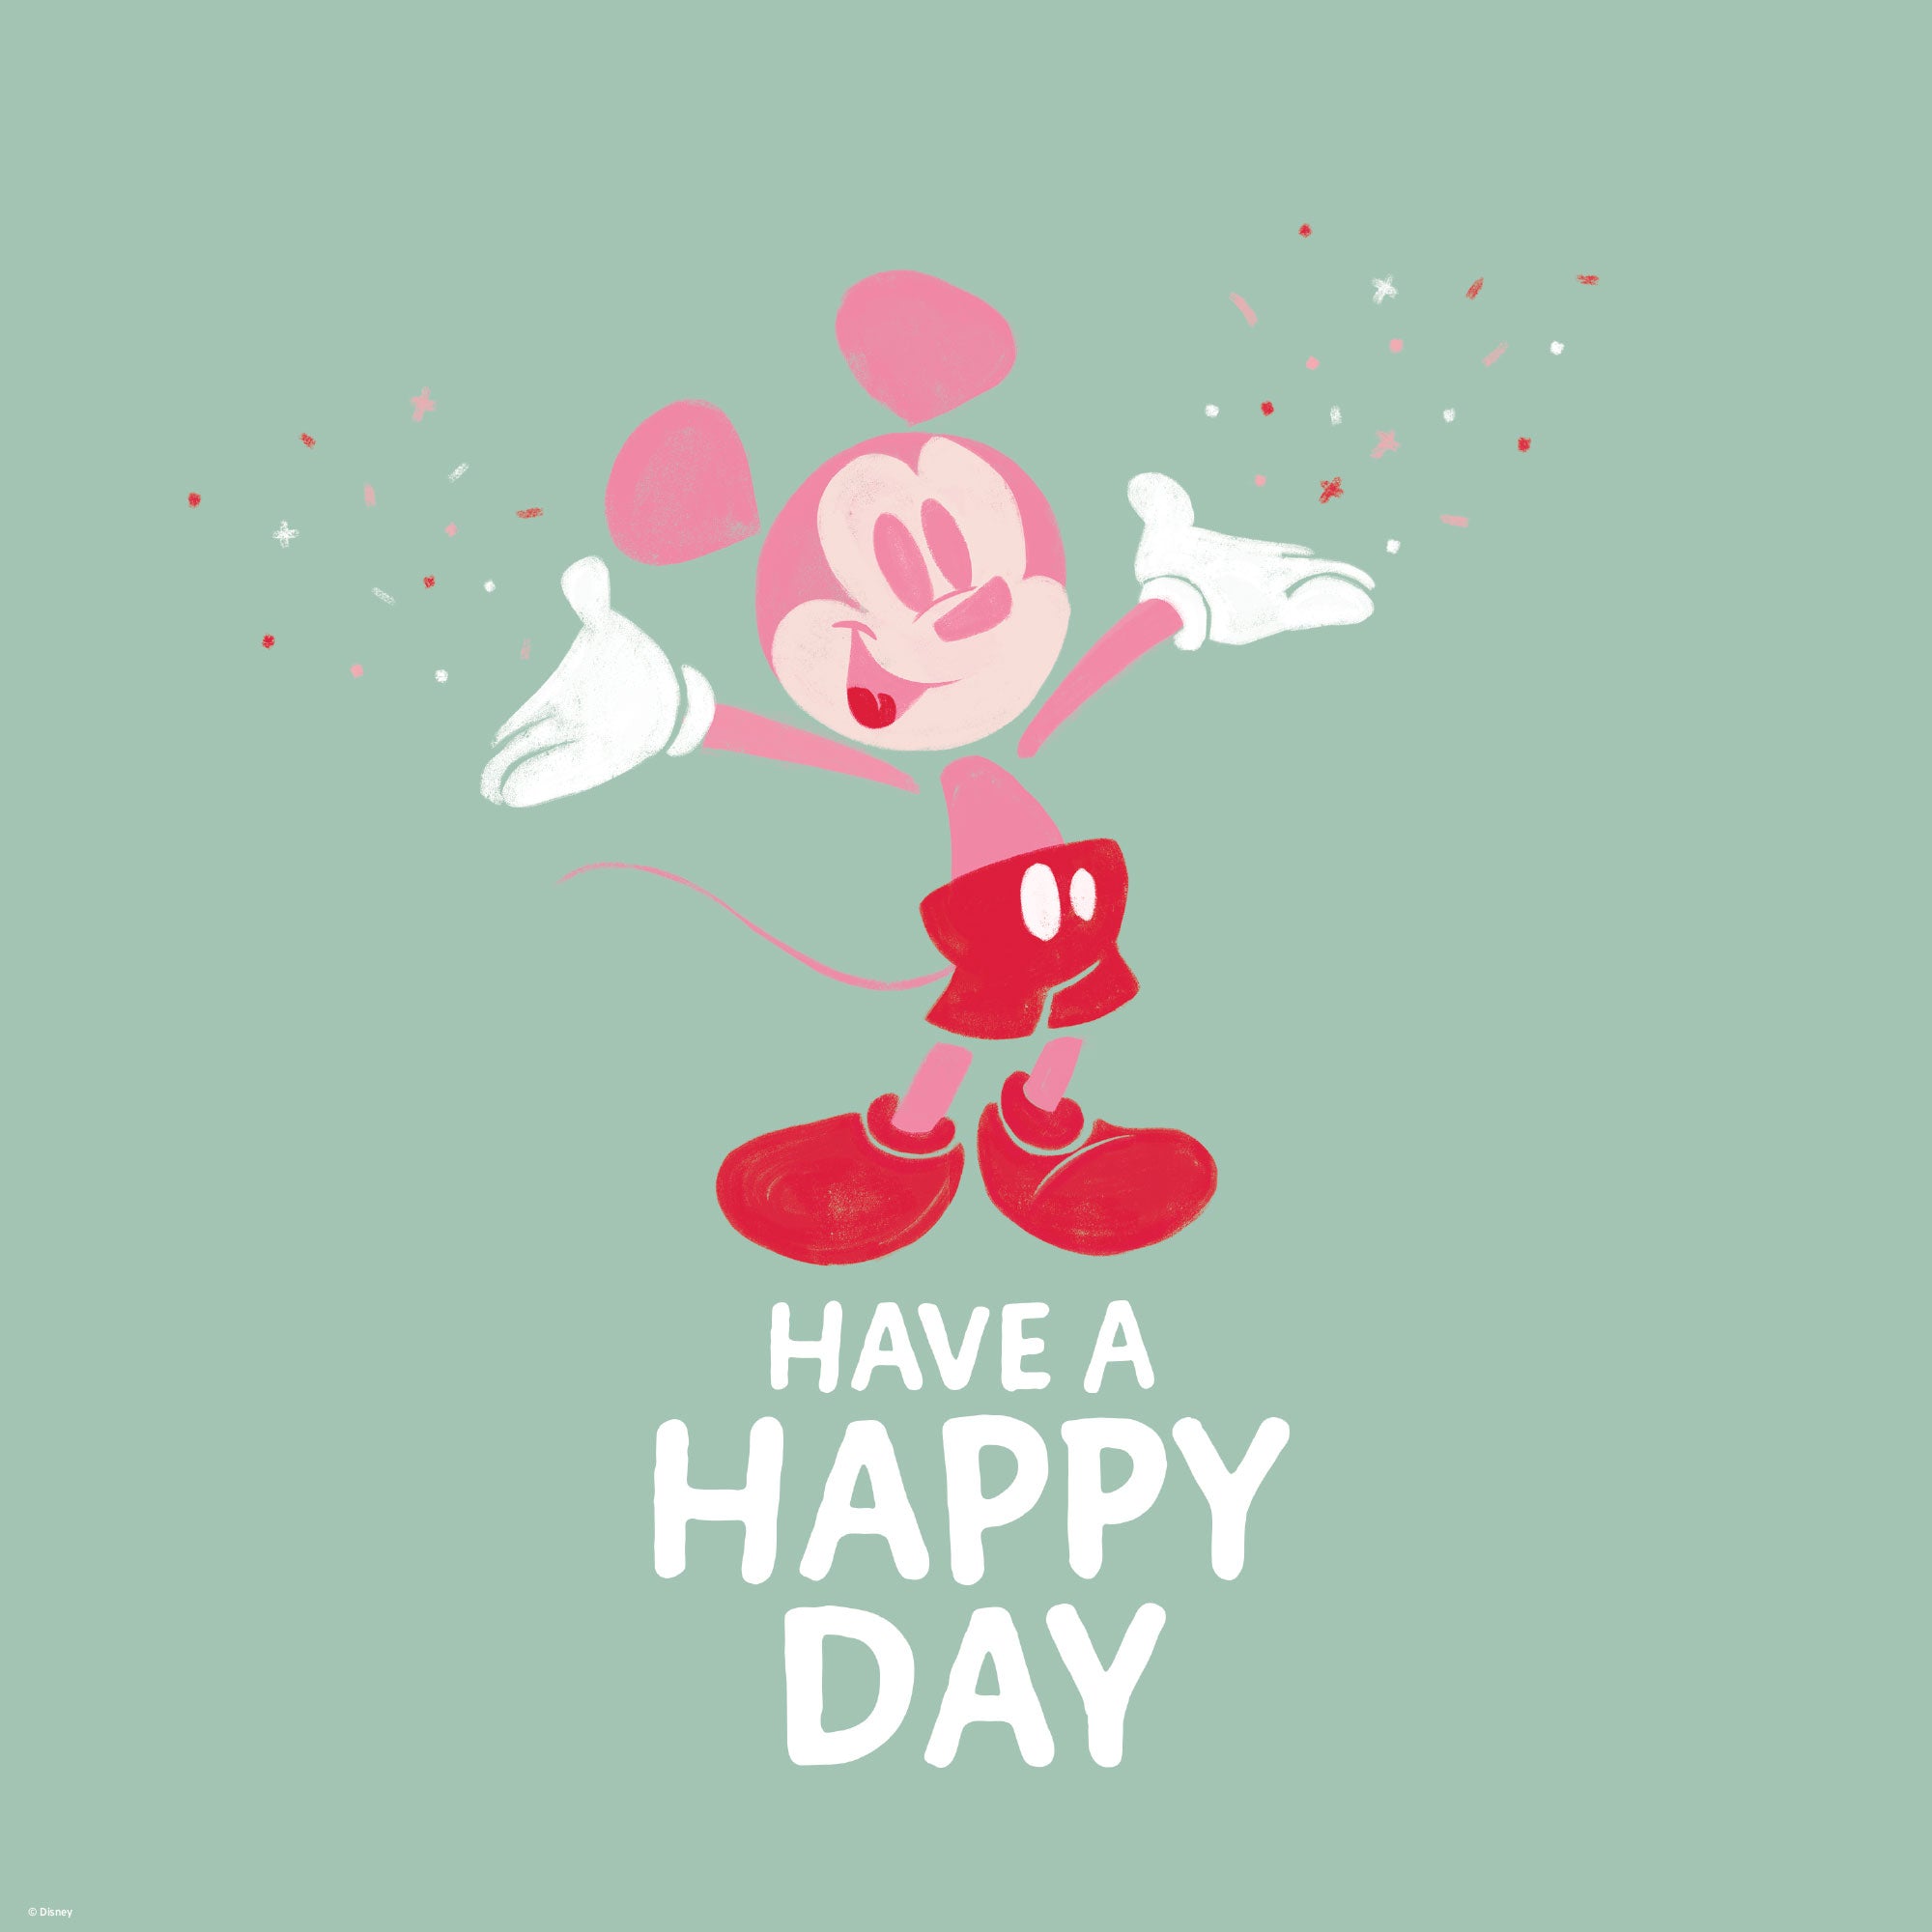 Mickey Mouse: Have a Happy Day Mural - Officially Licensed Disney